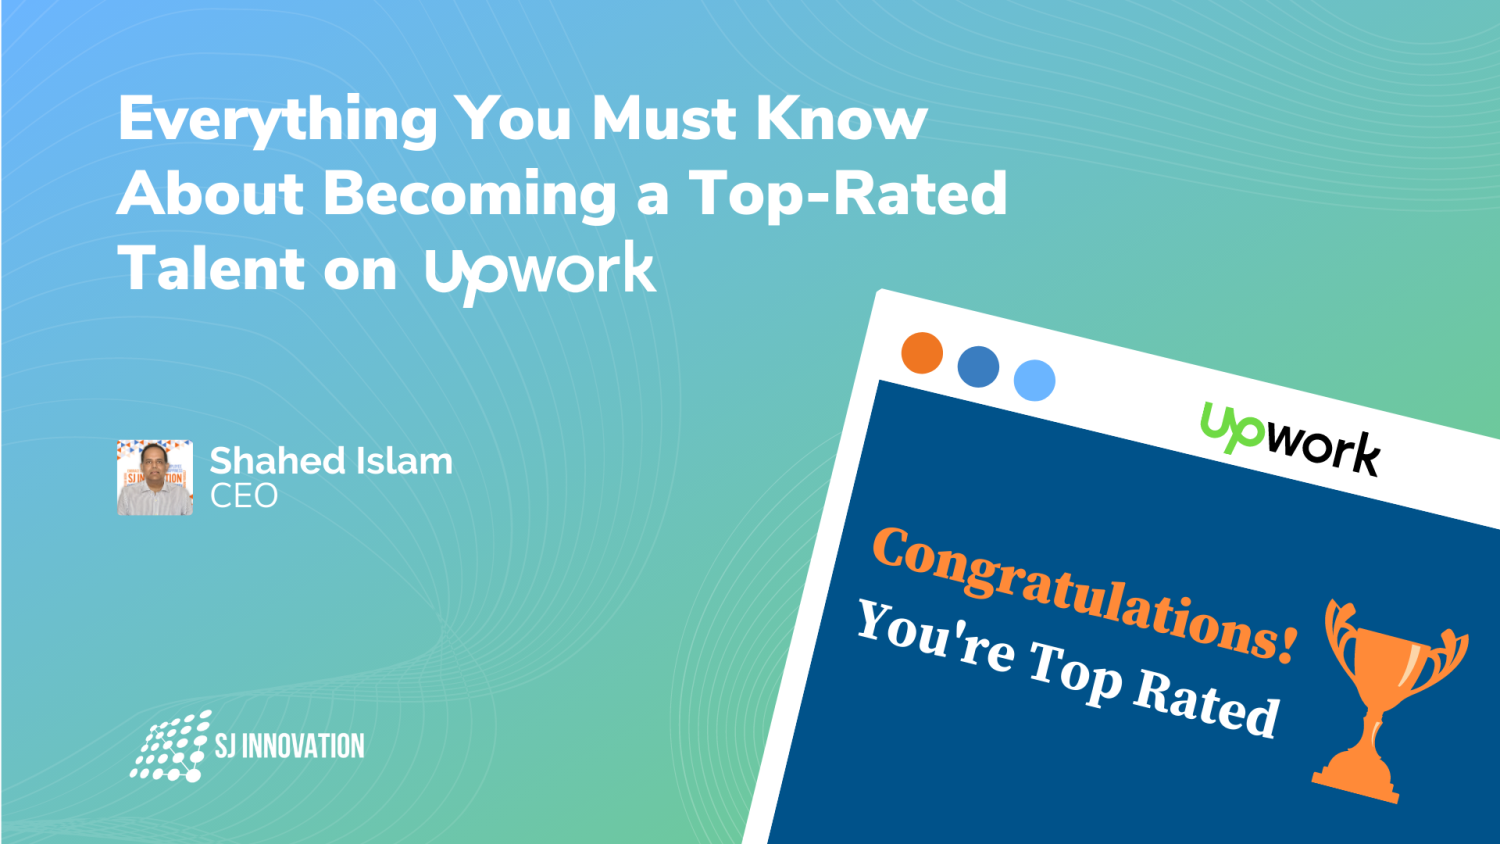 Everything You Must Know About Becoming a Top-Rated Talent on Upwork